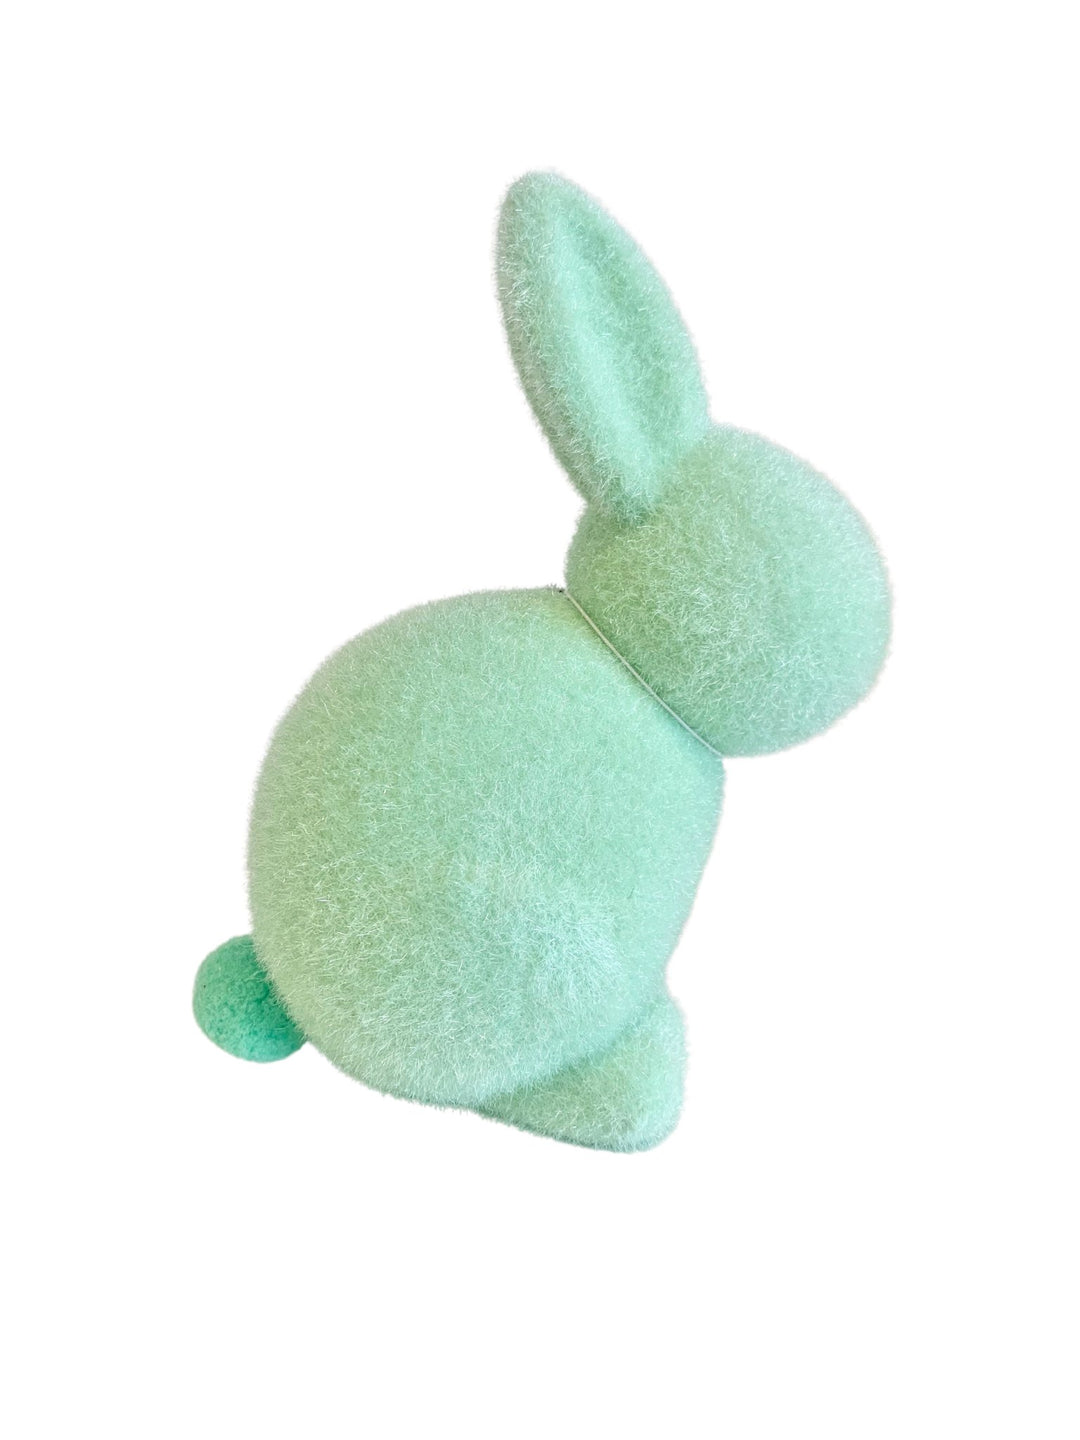 Large Flocked Seated Bunny - #Perch#